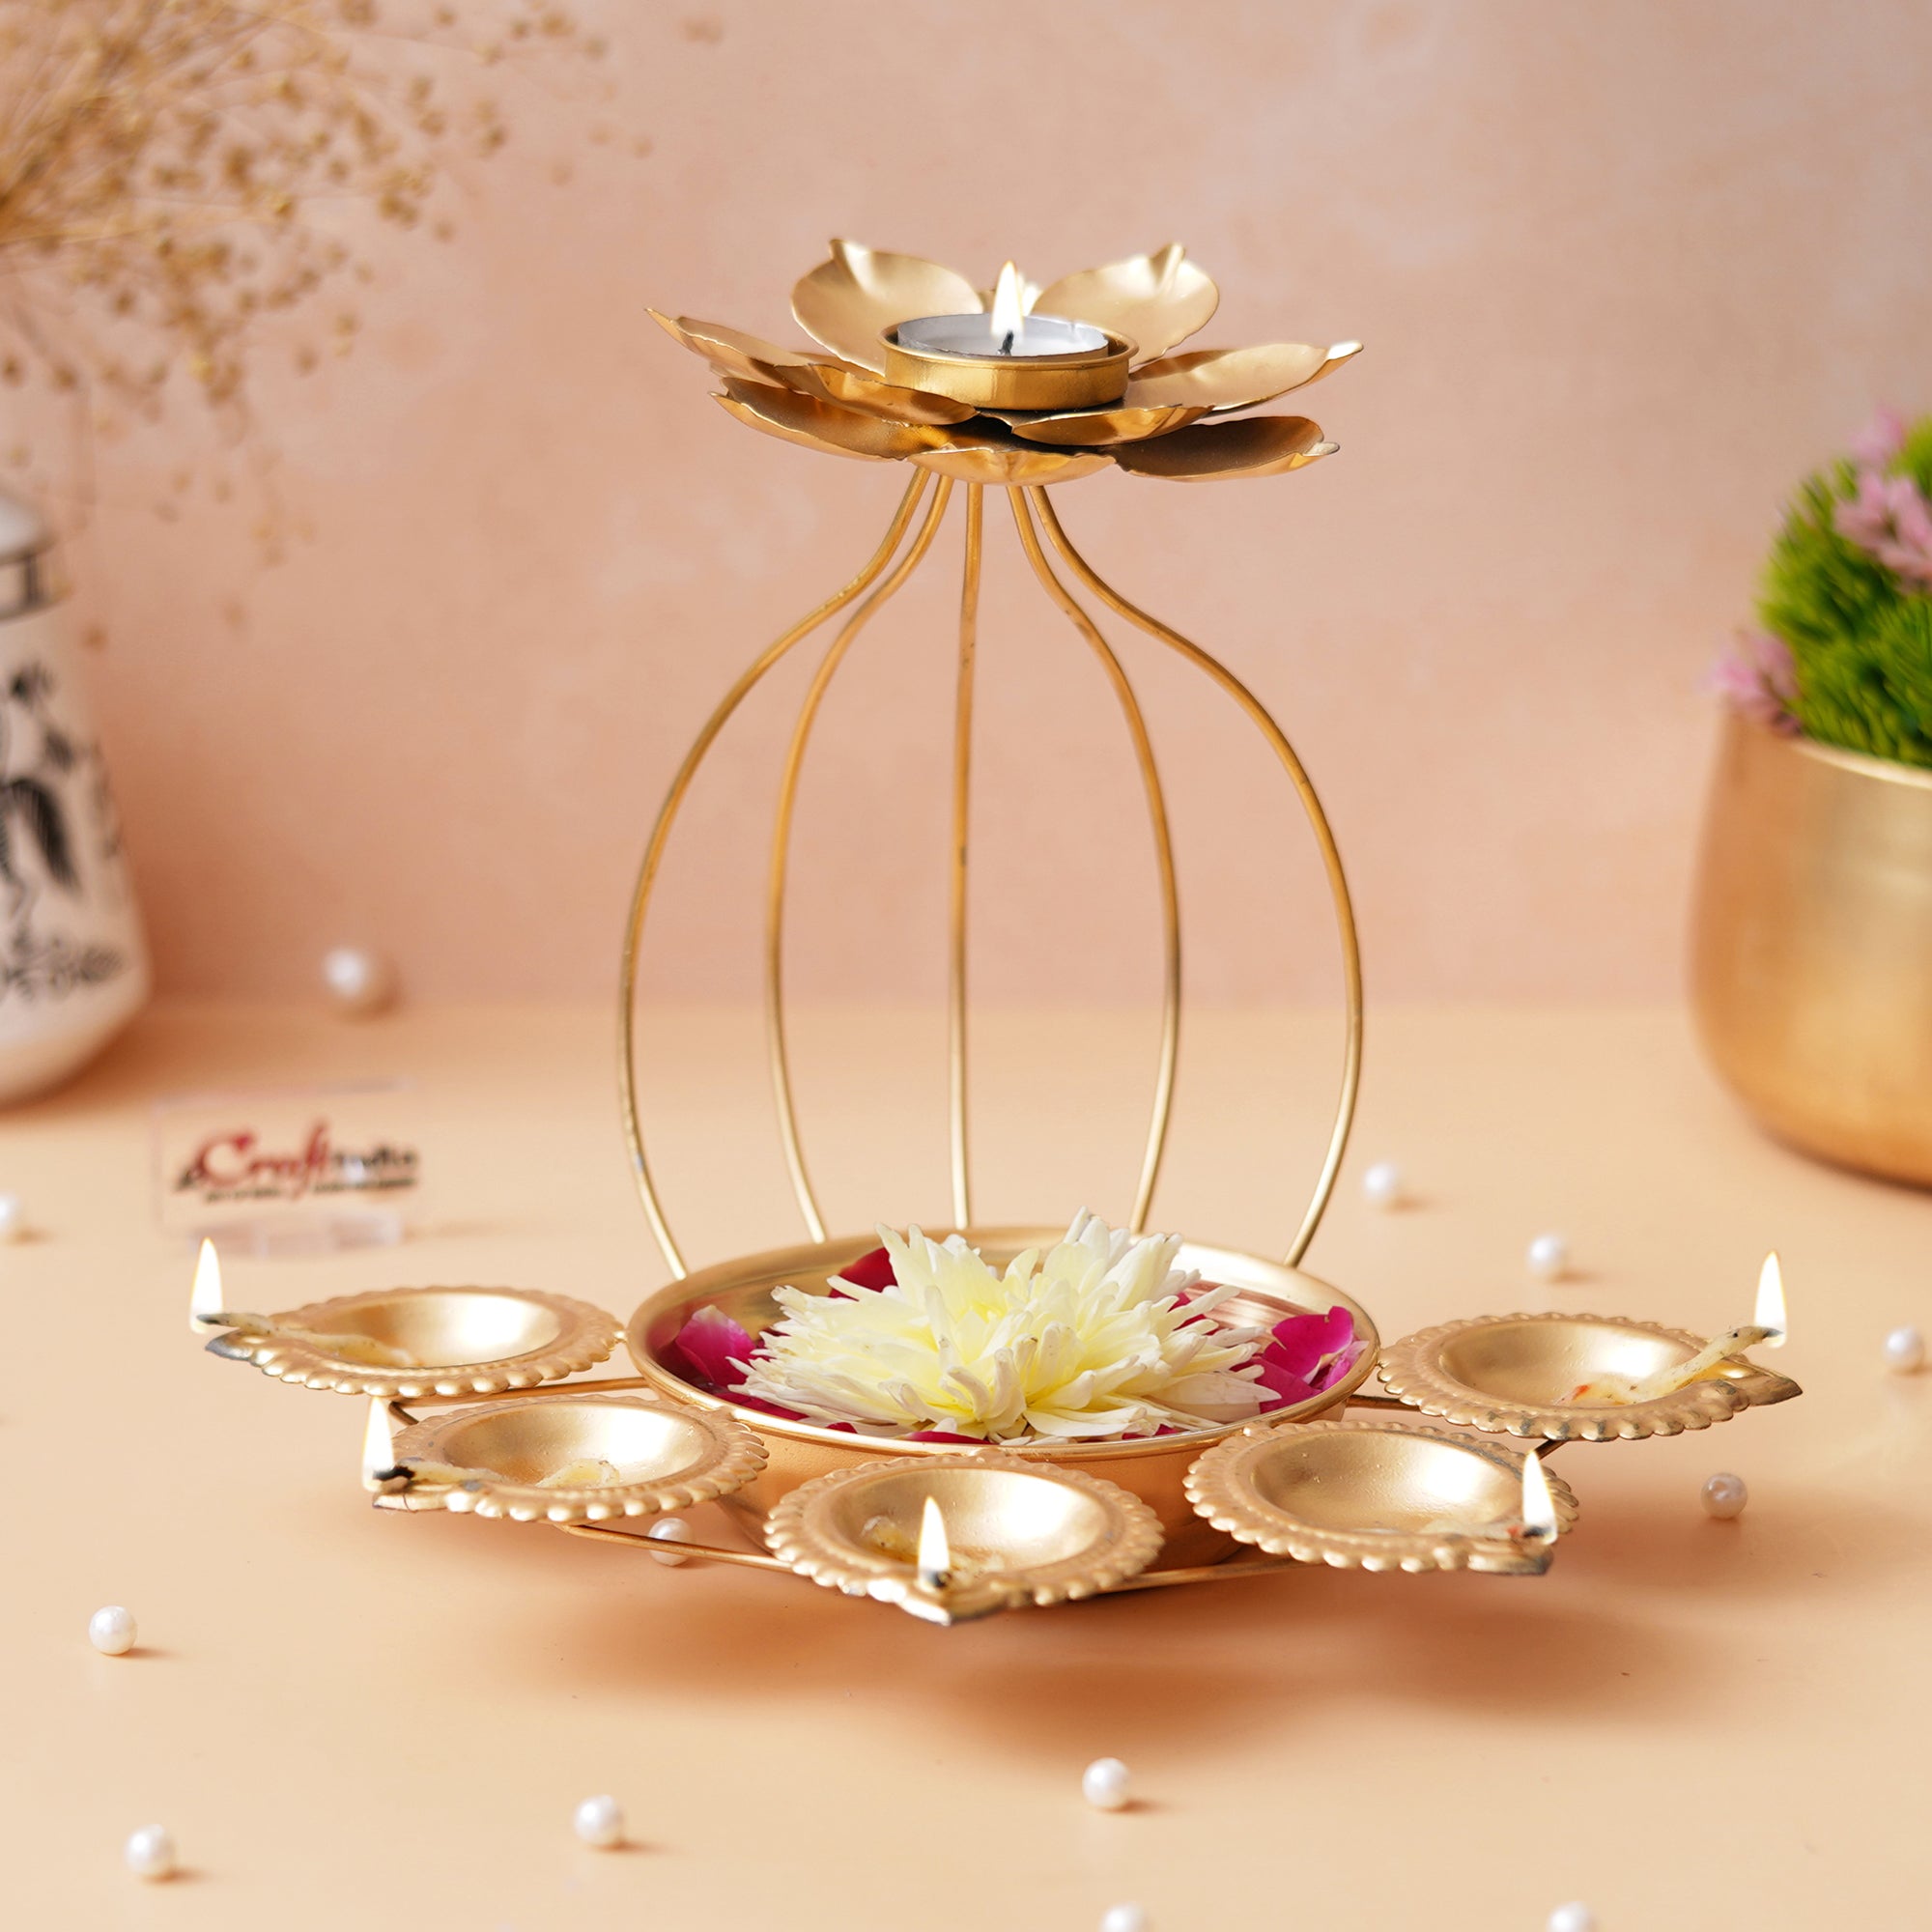 Golden Metal Handcrafted Lotus Shaped Decorative Urli with Tea Light Candle Holder 5